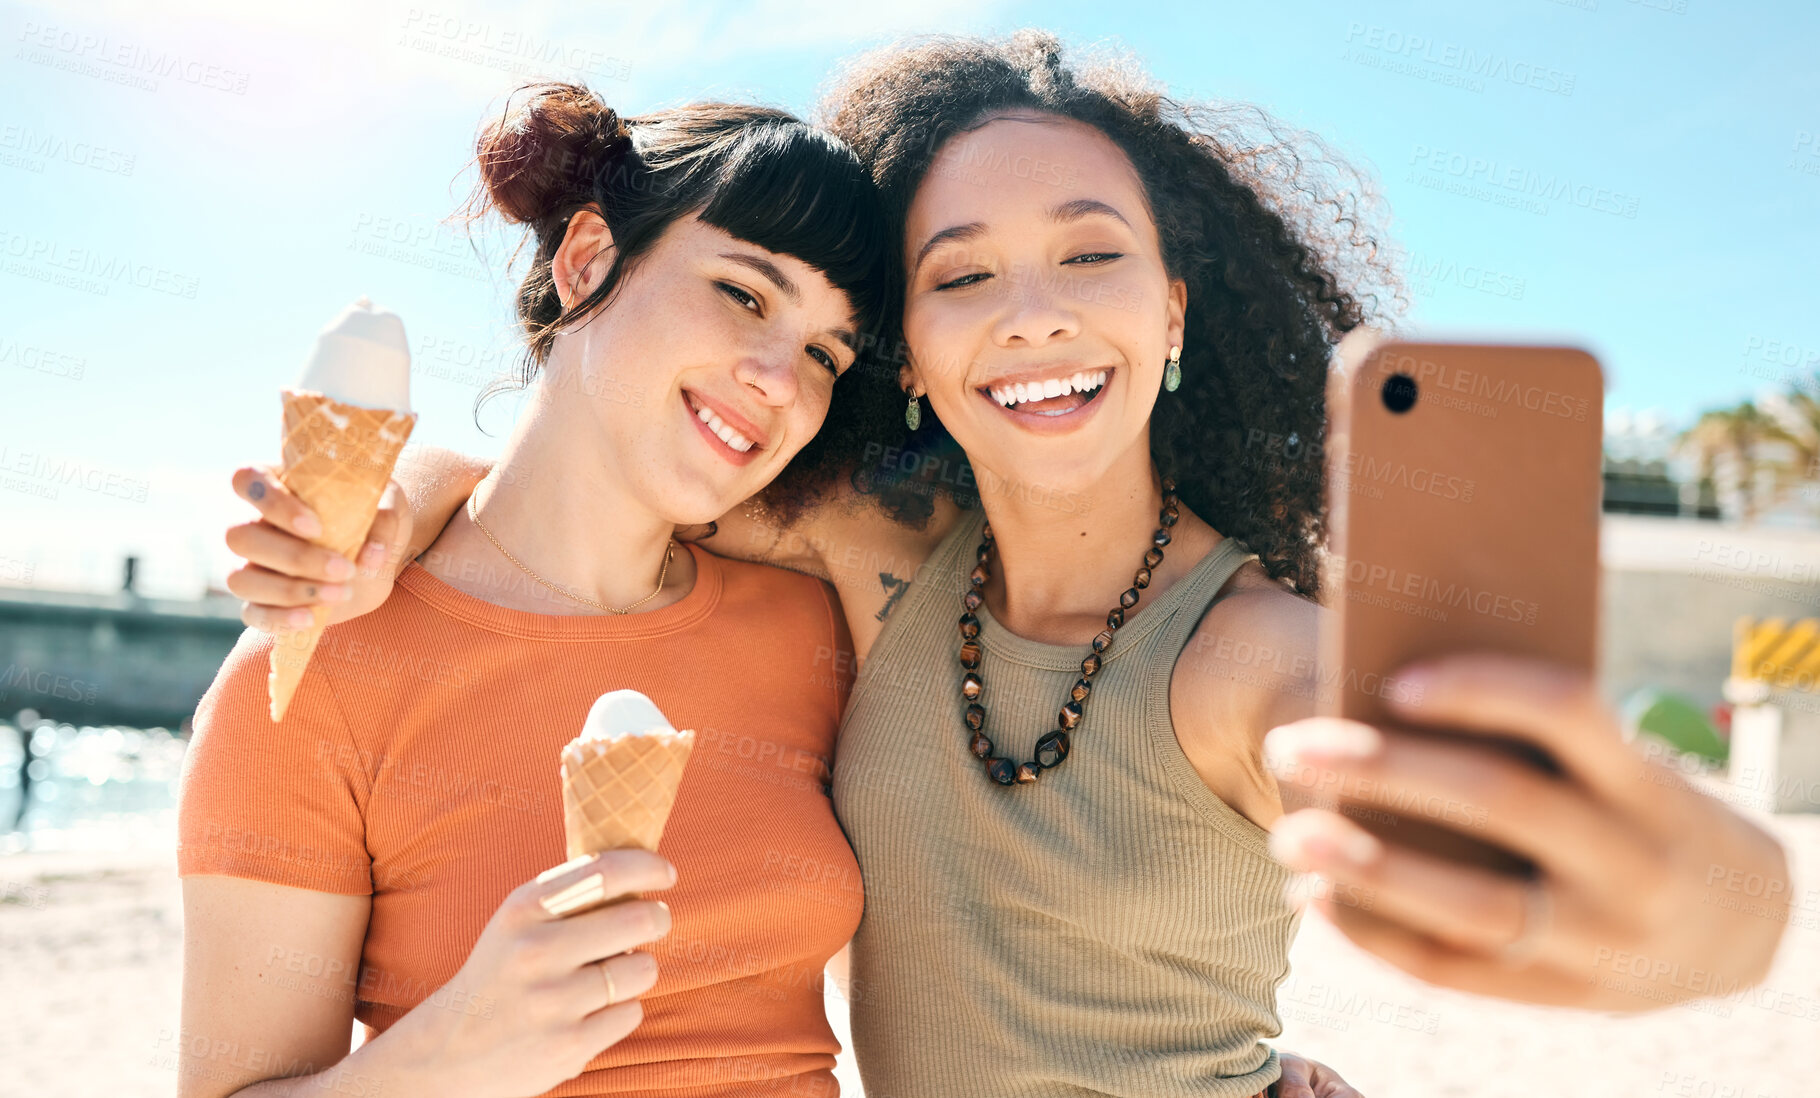 Buy stock photo Cropped shot of two attractive young girlfriends taking selfies while enjoying ice creams on the beach